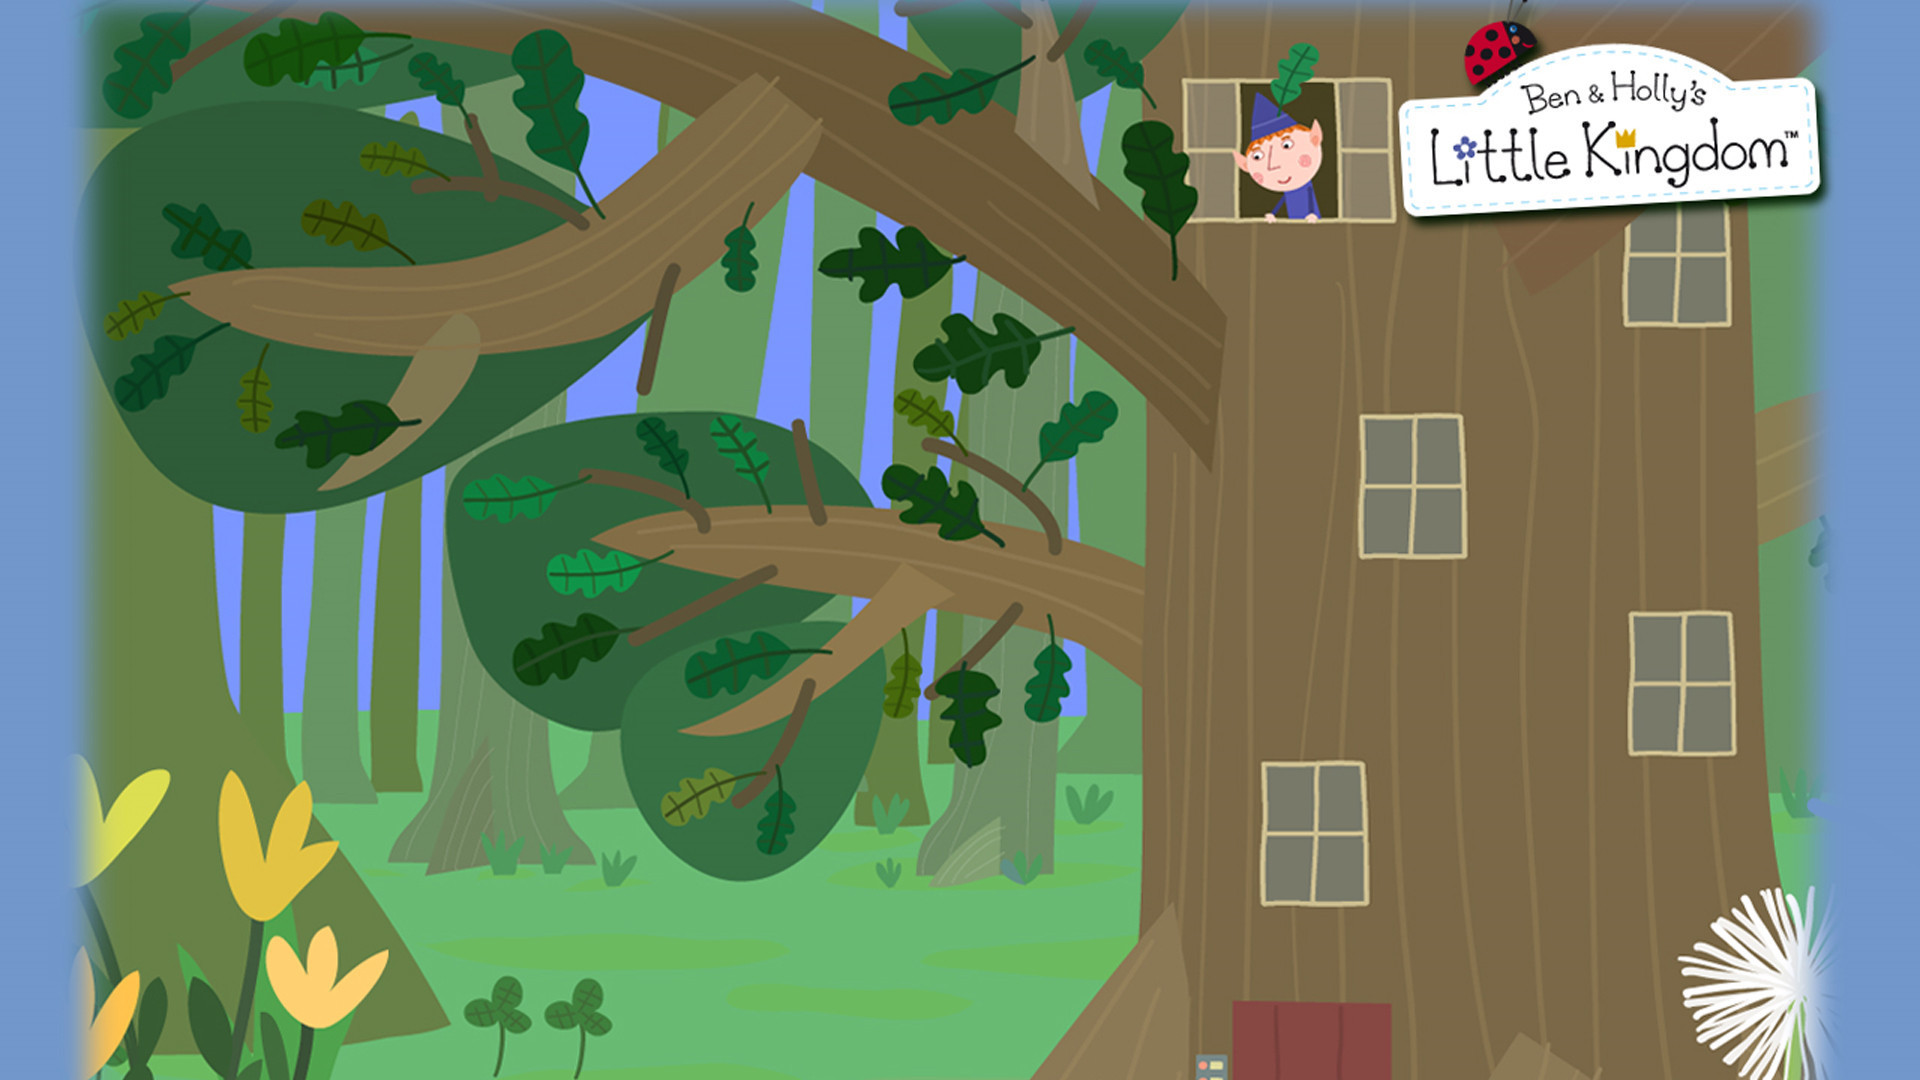 Ben and Holly's Little Kingdom backdrop / wallpaper 2